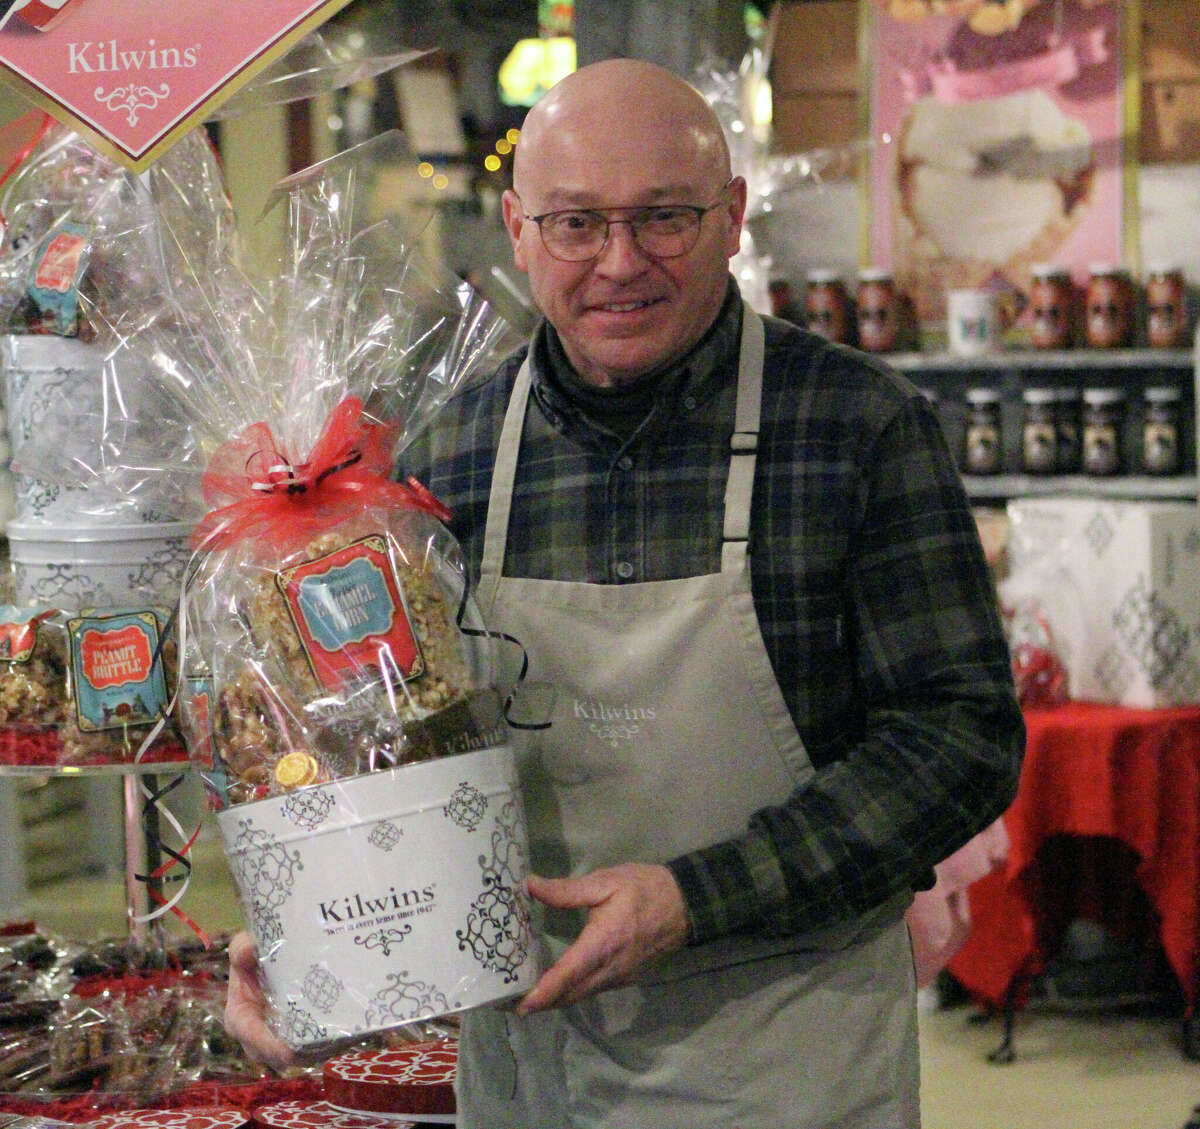 Owners of local eateries, such as Brian Rose of Kilwin's, is ready to see the annual rush of customers for Valentine's Day.